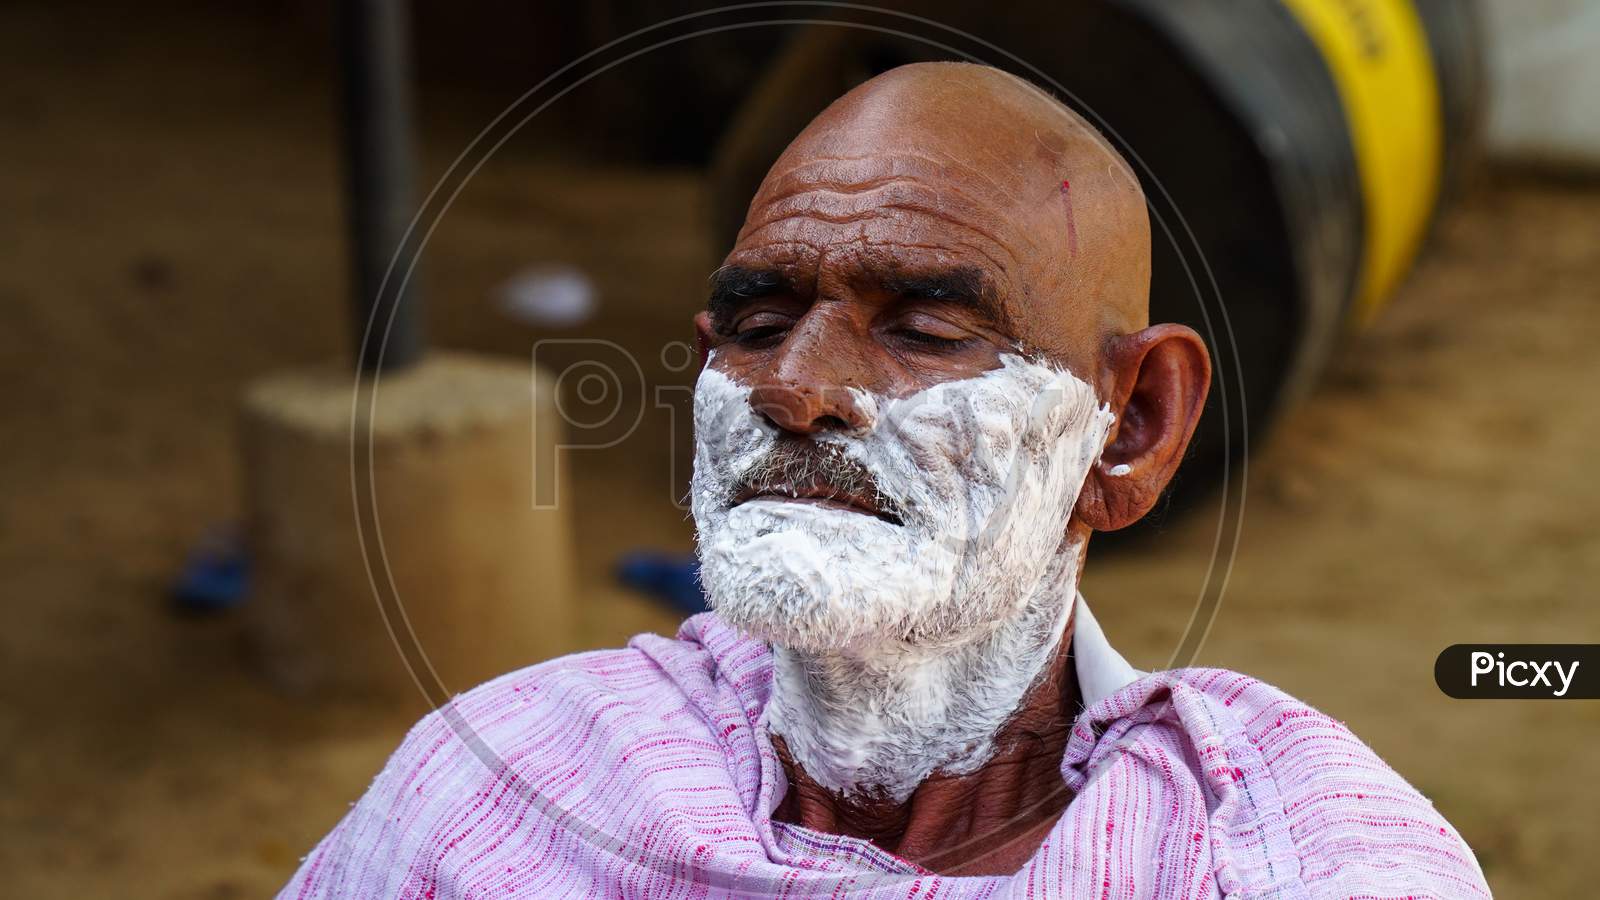 A Traditional Barber Is Shaving A Man In Village Of Sikar,India. Rural India Landscape.